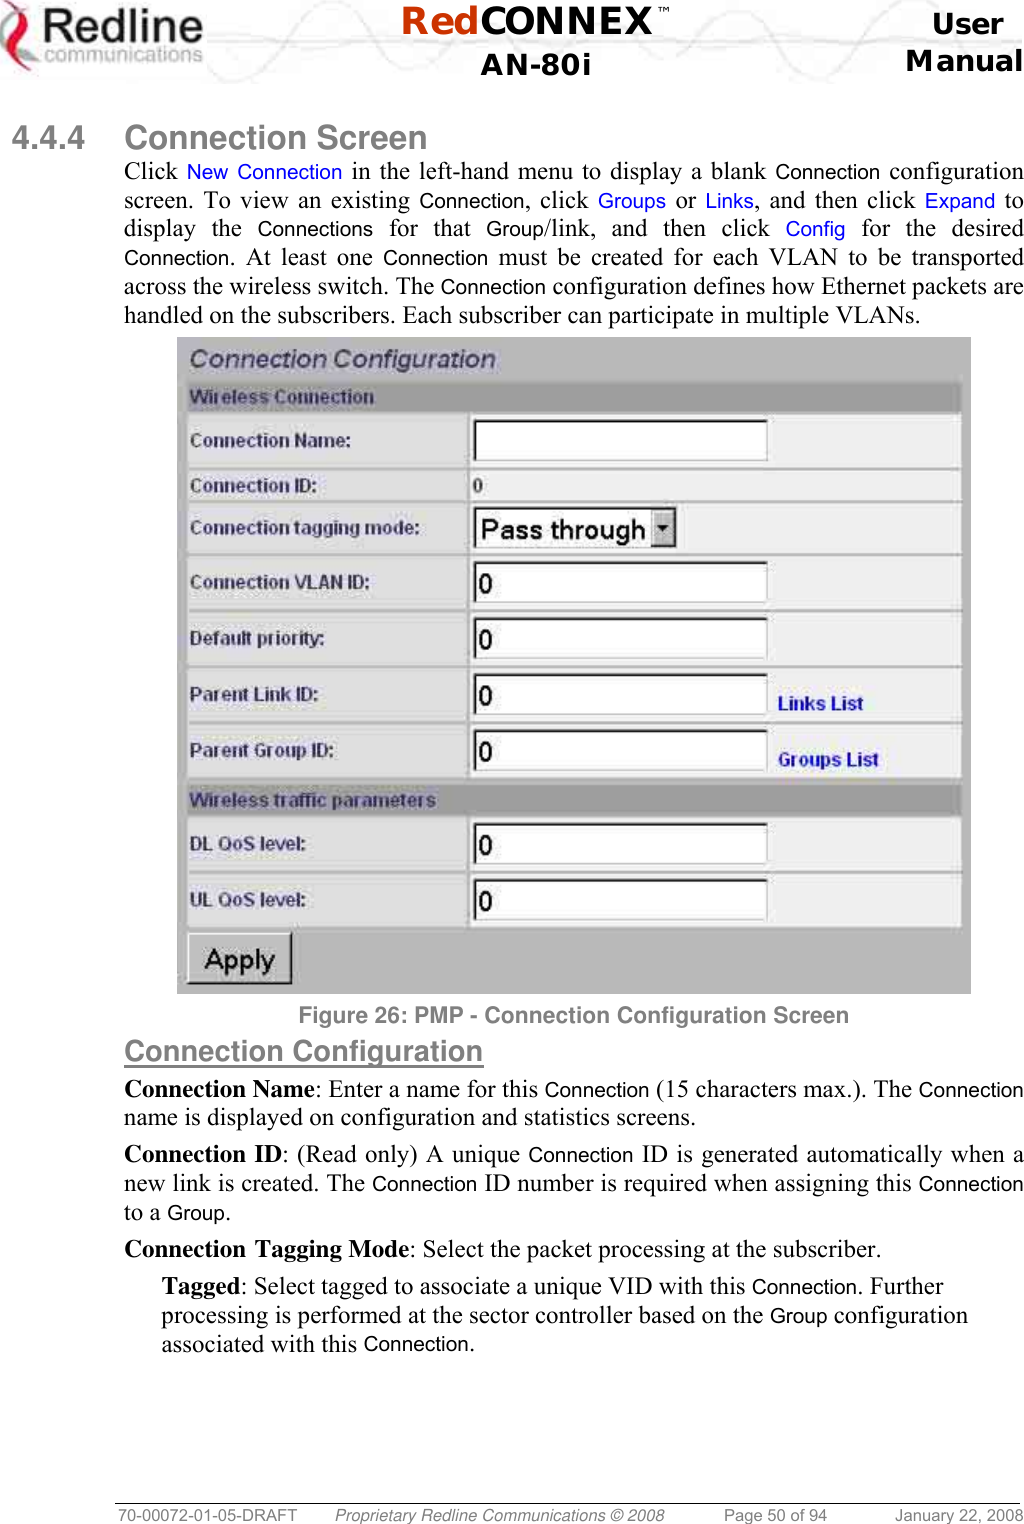  RedCONNEX™    User  AN-80i Manual  70-00072-01-05-DRAFT  Proprietary Redline Communications © 2008  Page 50 of 94  January 22, 2008  4.4.4 Connection Screen Click New Connection in the left-hand menu to display a blank Connection configuration screen. To view an existing Connection, click Groups or  Links, and then click Expand to display the Connections for that Group/link, and then click Config for the desired Connection. At least one Connection must be created for each VLAN to be transported across the wireless switch. The Connection configuration defines how Ethernet packets are handled on the subscribers. Each subscriber can participate in multiple VLANs.  Figure 26: PMP - Connection Configuration Screen  Connection Configuration Connection Name: Enter a name for this Connection (15 characters max.). The Connection name is displayed on configuration and statistics screens. Connection ID: (Read only) A unique Connection ID is generated automatically when a new link is created. The Connection ID number is required when assigning this Connection to a Group. Connection Tagging Mode: Select the packet processing at the subscriber. Tagged: Select tagged to associate a unique VID with this Connection. Further processing is performed at the sector controller based on the Group configuration associated with this Connection. 